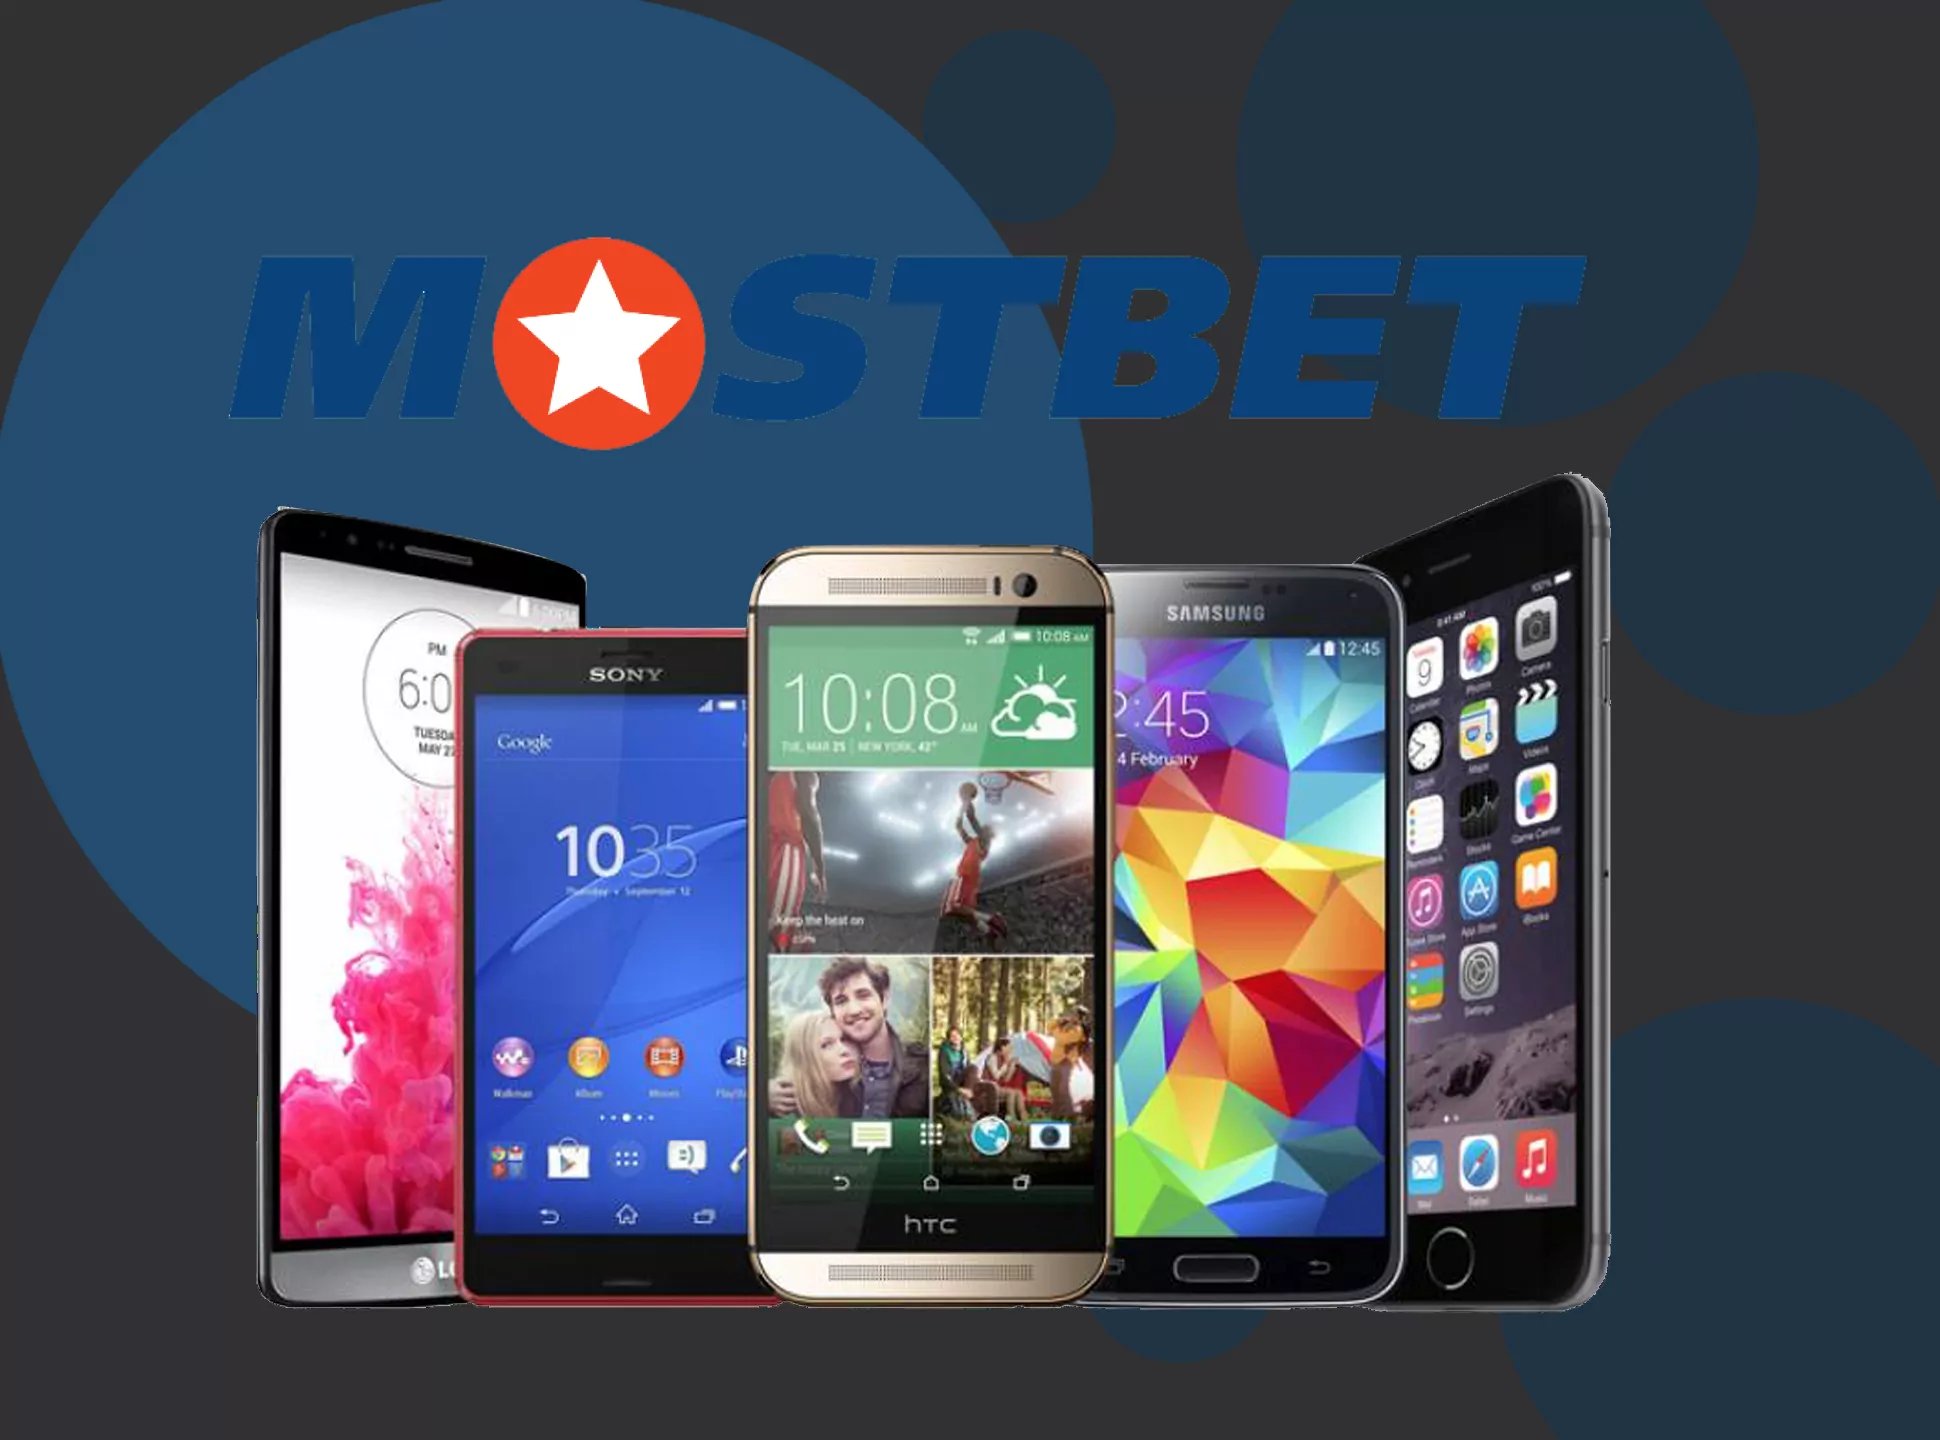 Install the Mostbet app on your Android device.